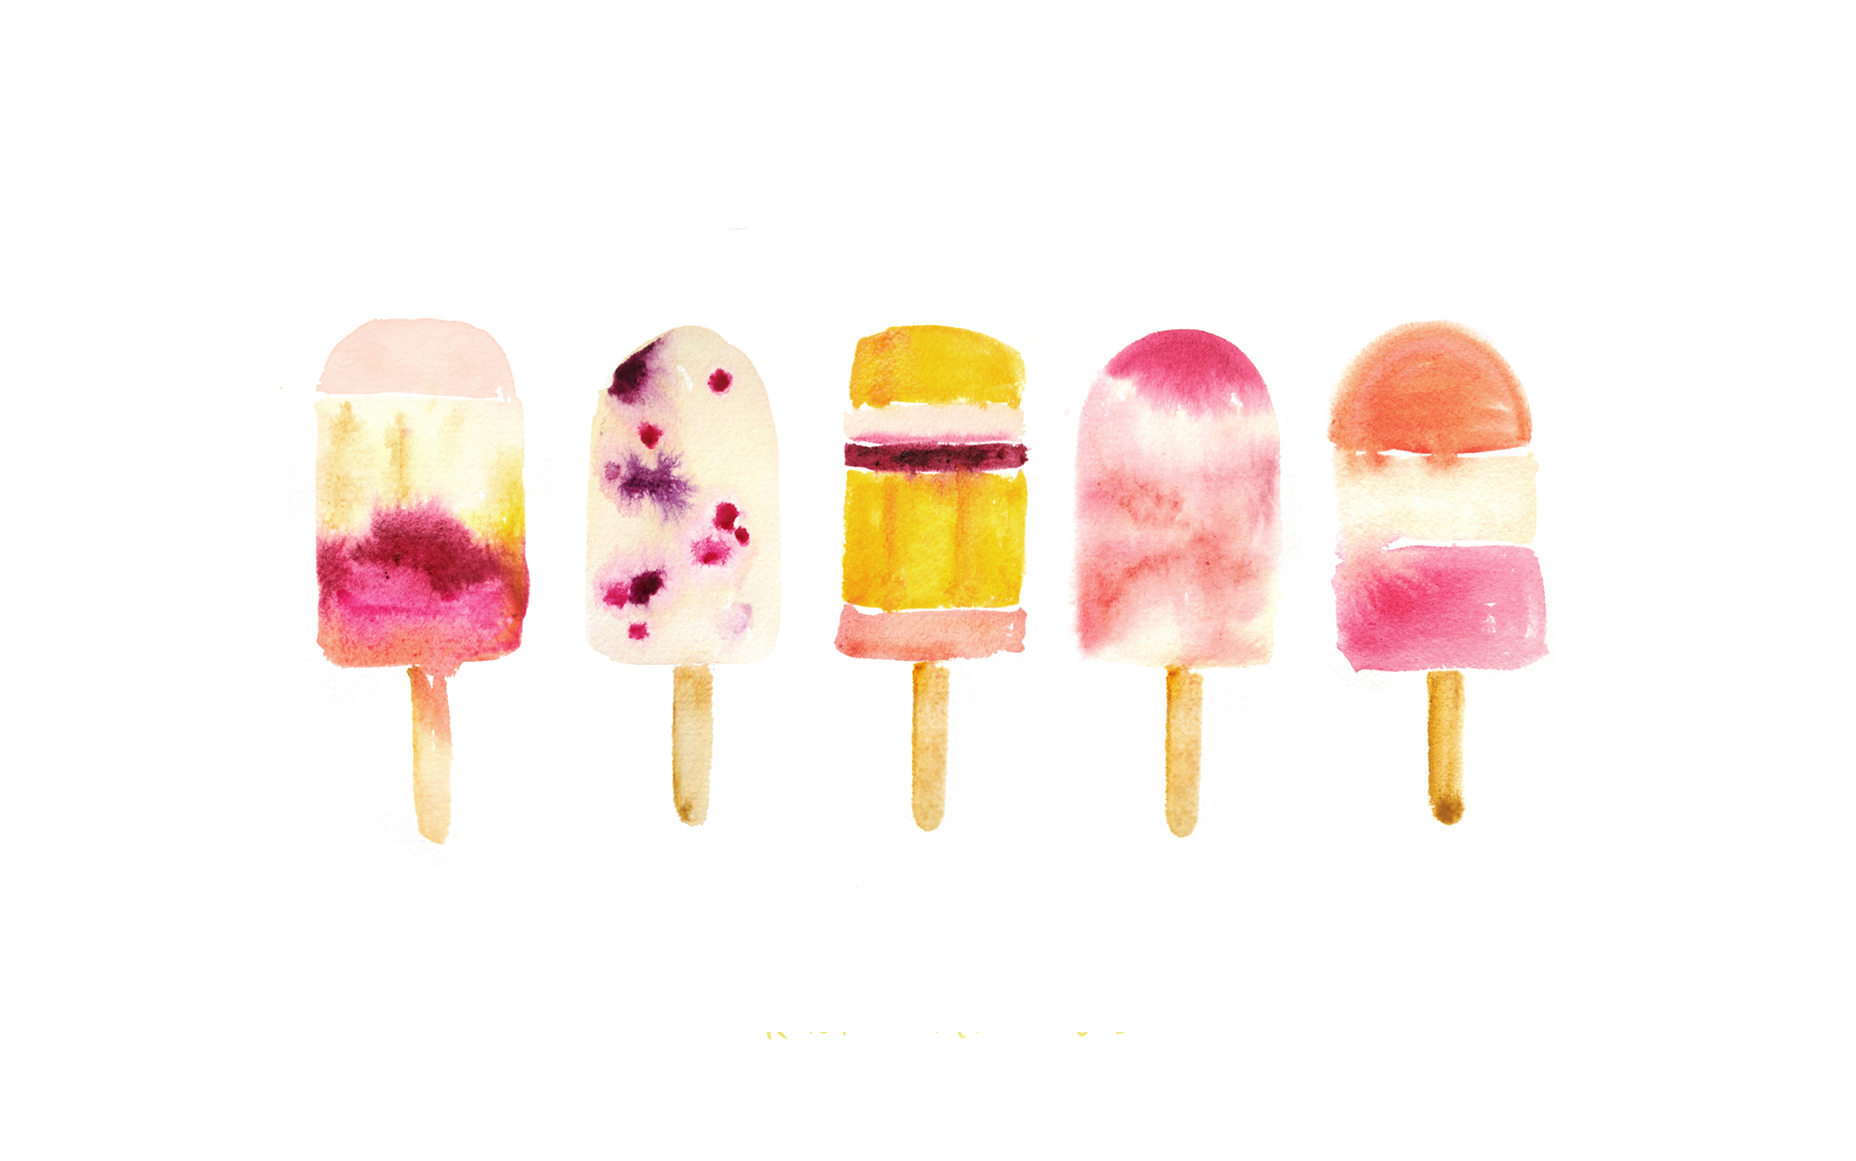 Wallpaper With This Cute Popsicle Illustration Courtesy Of Design Love